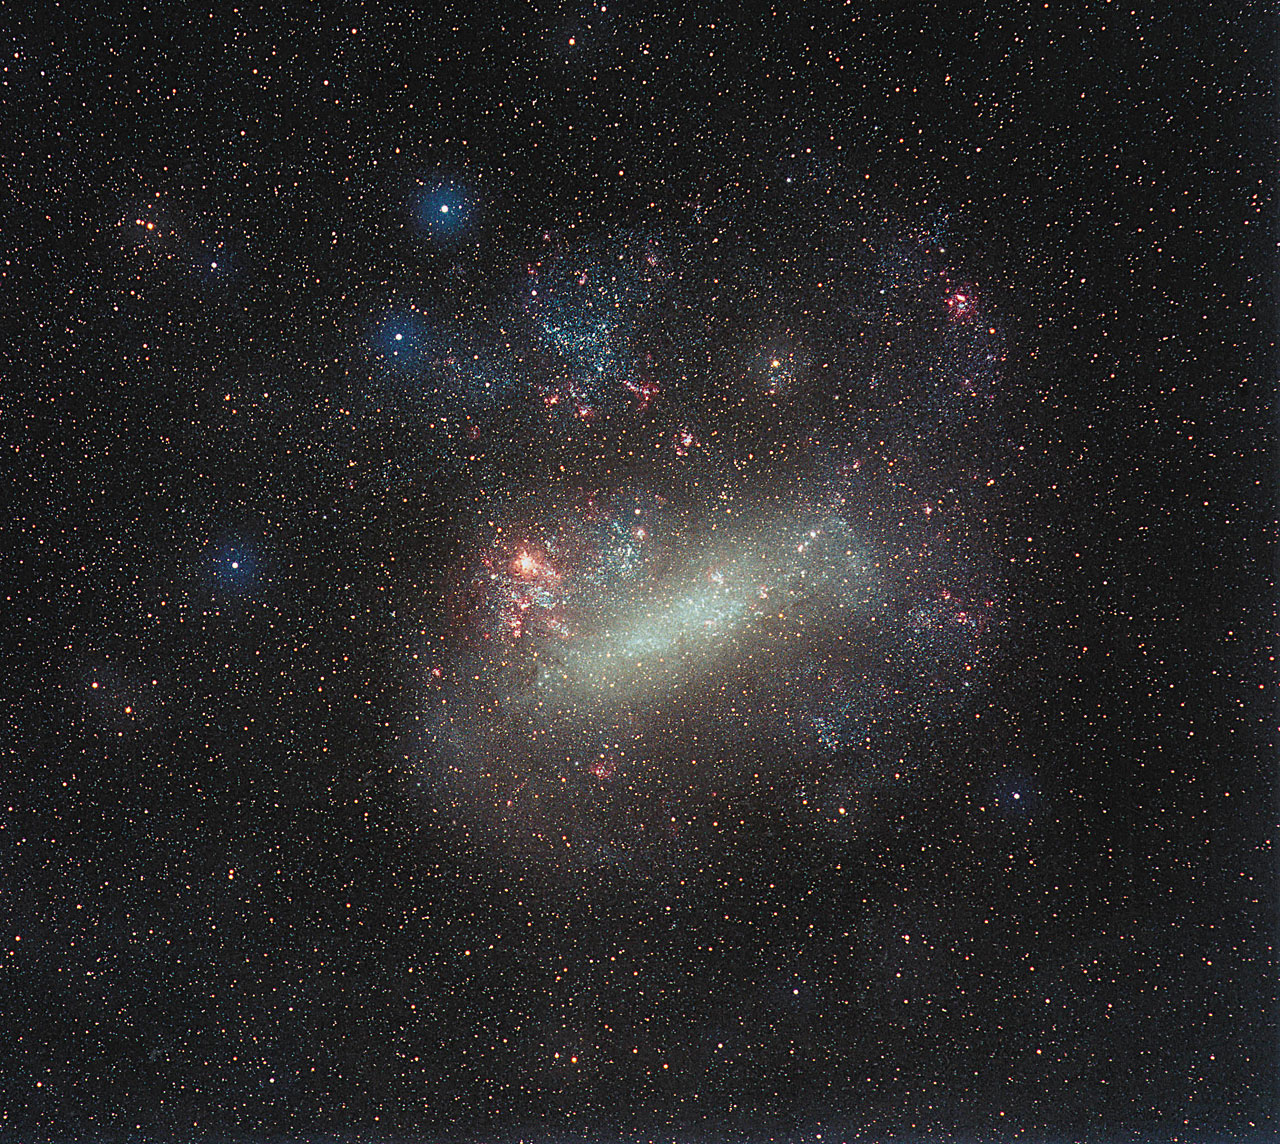 This ground-based image of the Large Magellanic Cloud was taken by the German astrophotographer Eckhard Slawik. It spans 10 x 10 degrees. Just to the left of the middle of this image the largest star-forming region in the Local Group of galaxies, 30 Doradus, is seen as a red patch. N11B itself is seen in the upper right part of the LMC.